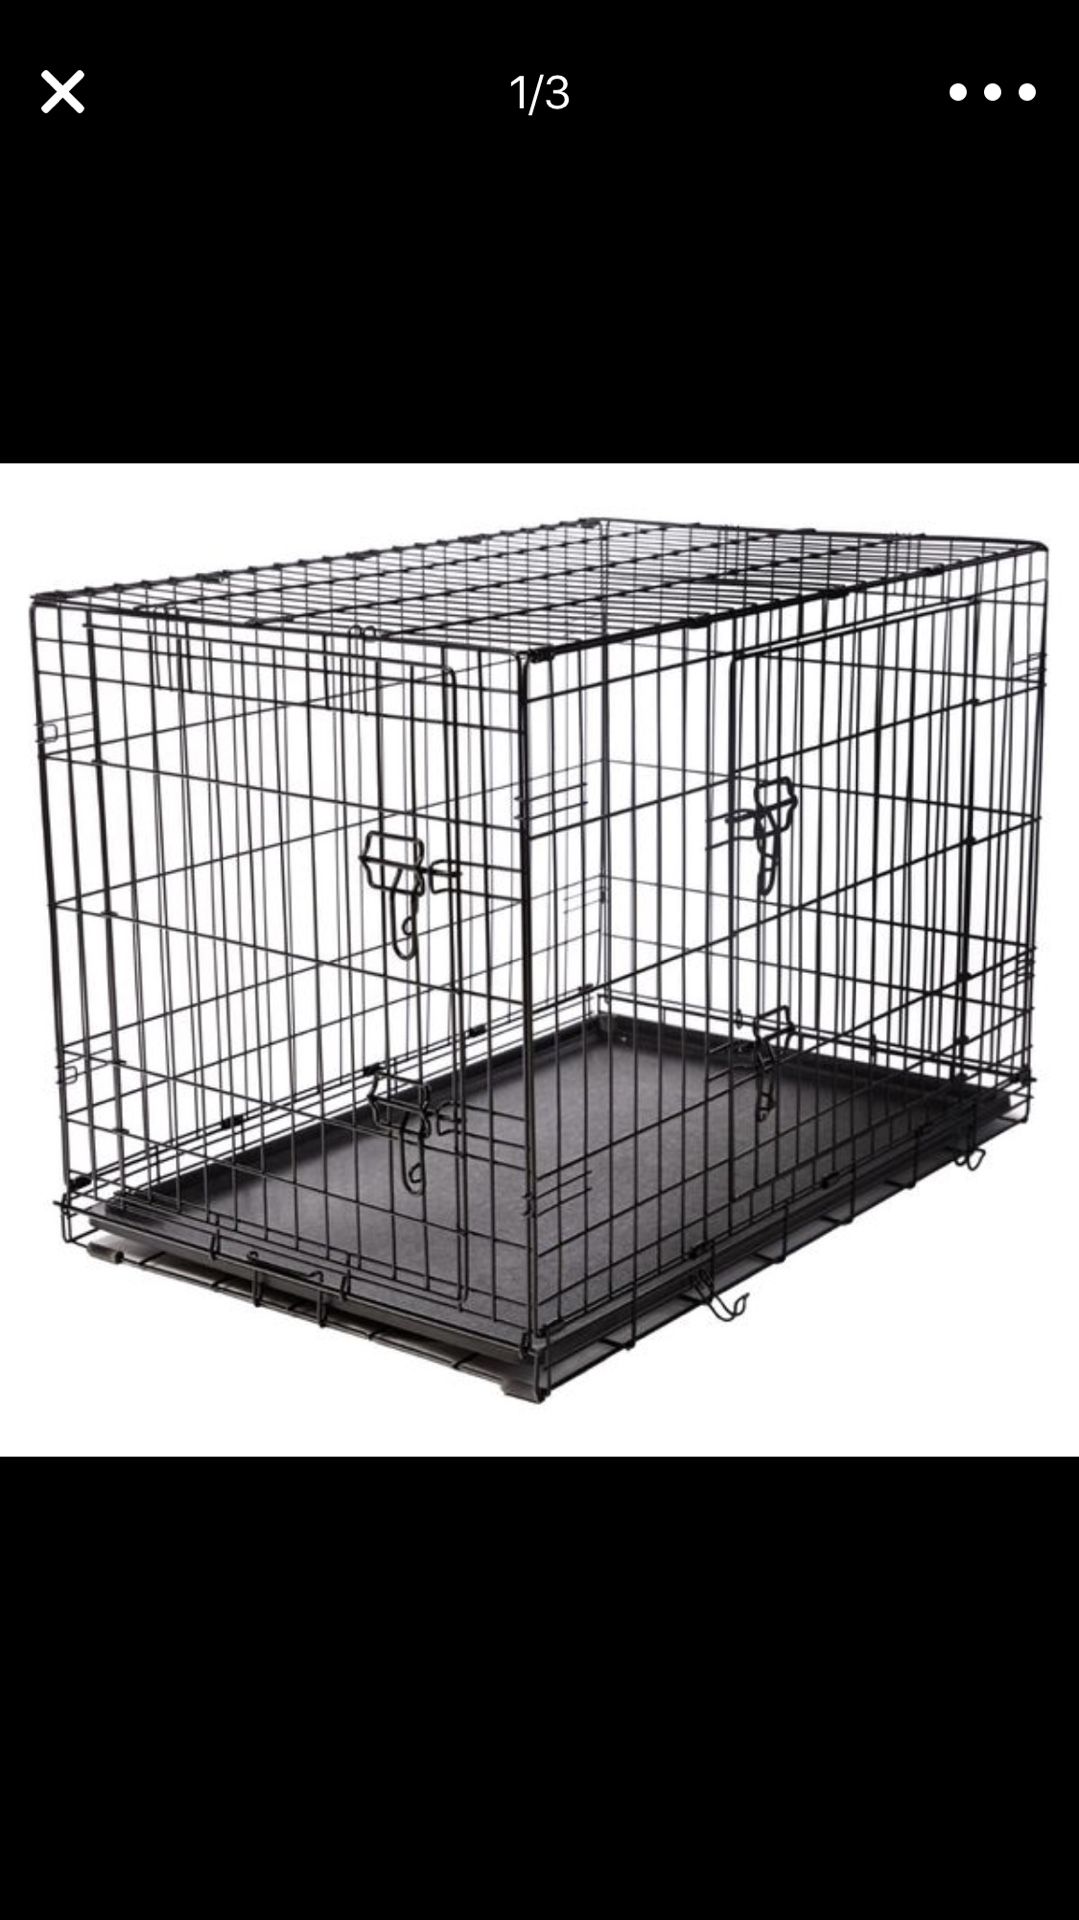 Dog crates and cages all sizes small medium large xl and xxl